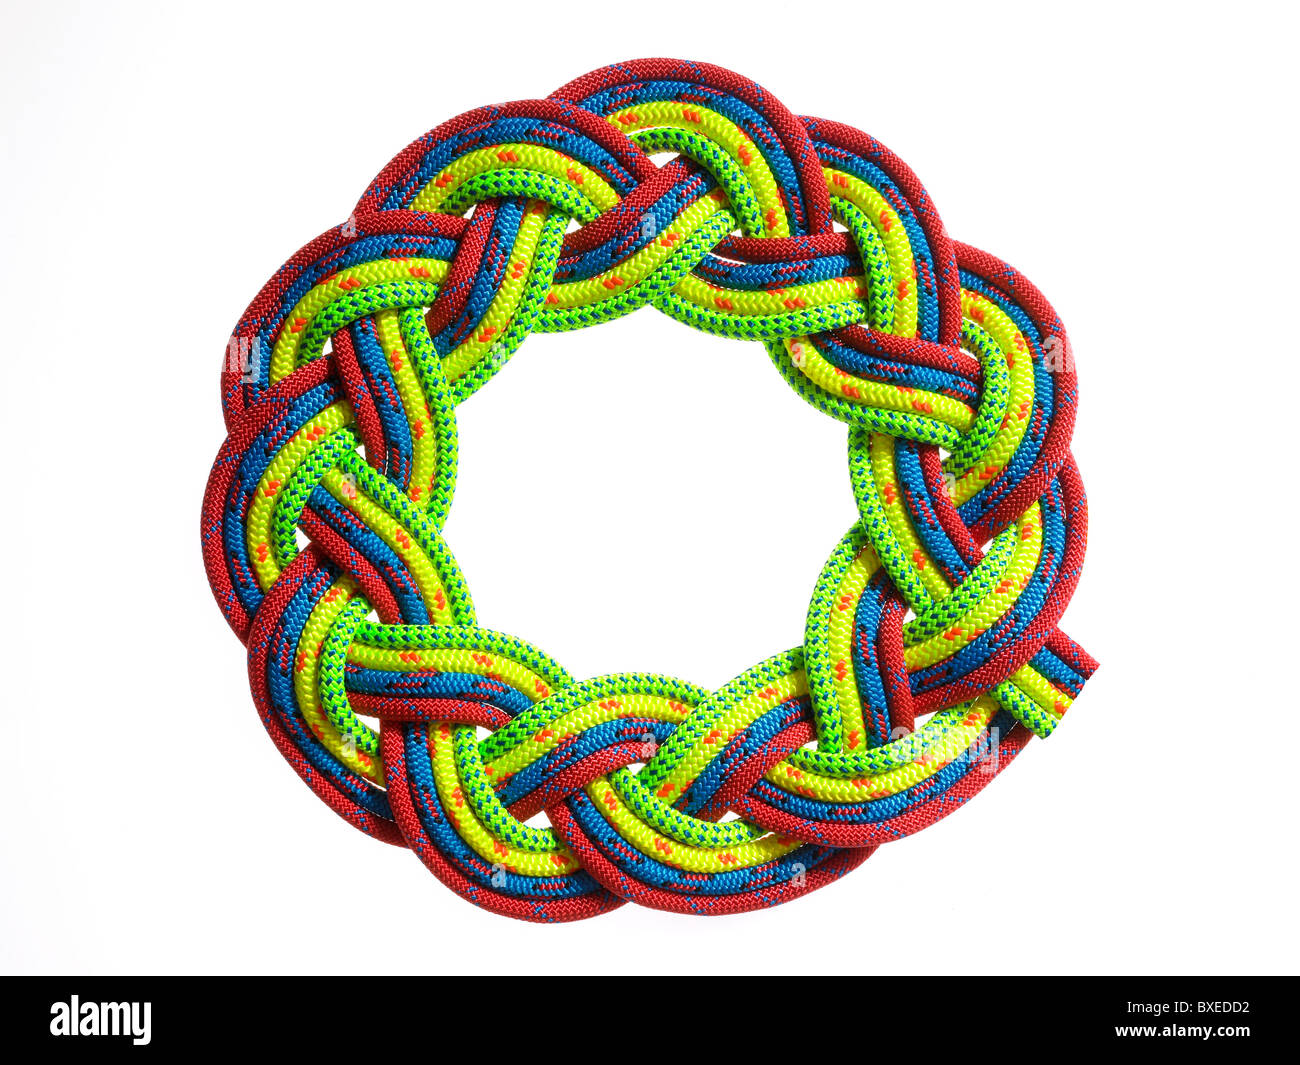 Colorful rope braided in a circle Stock Photo - Alamy